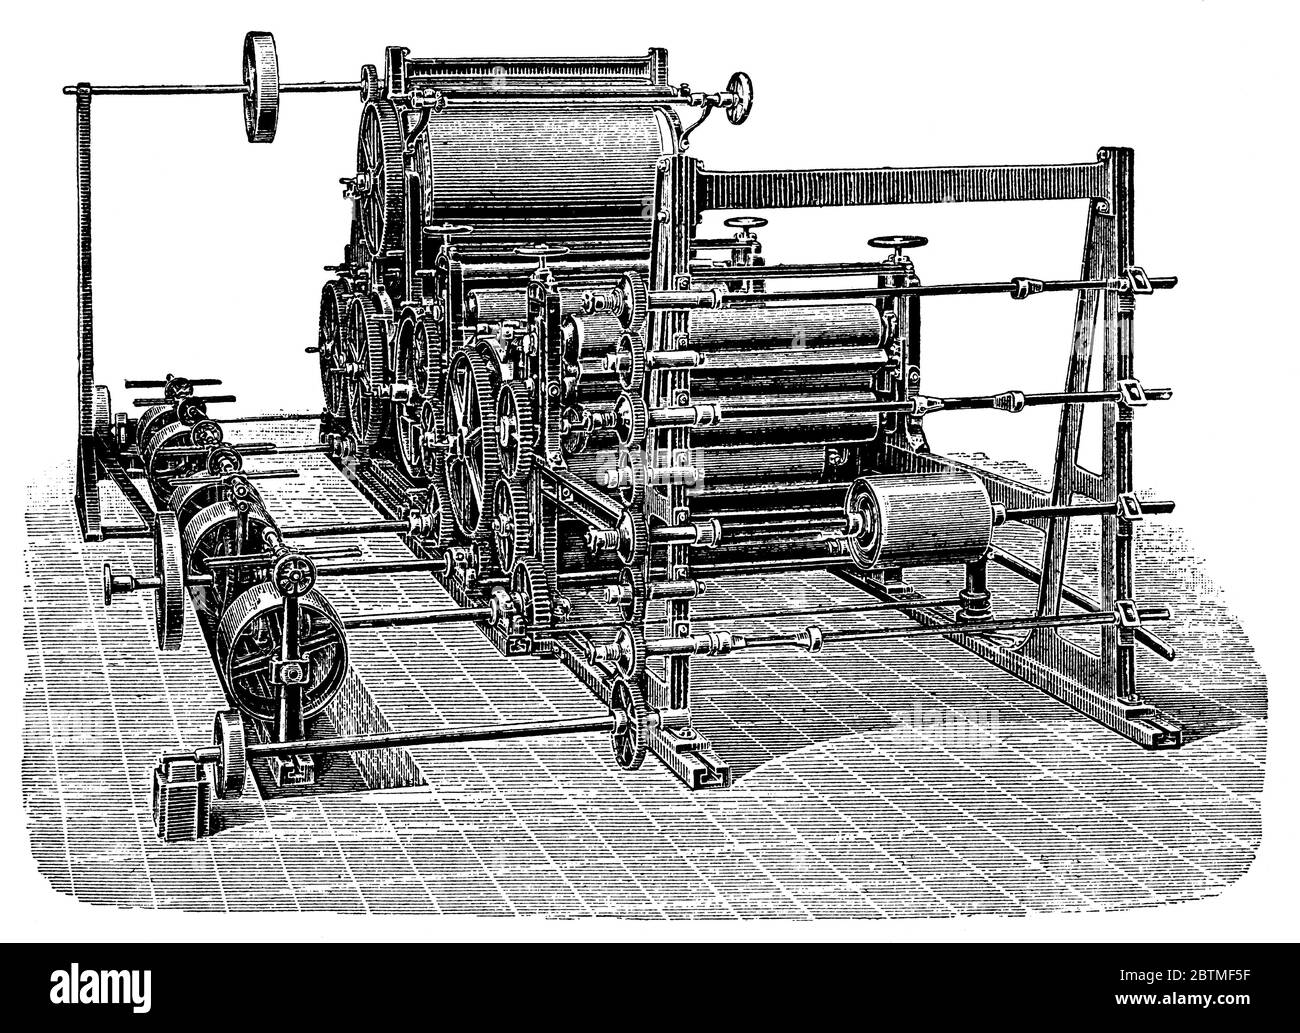 Equipment for the paper industry (dryer). Illustration of the 19th century. White background. Stock Photo